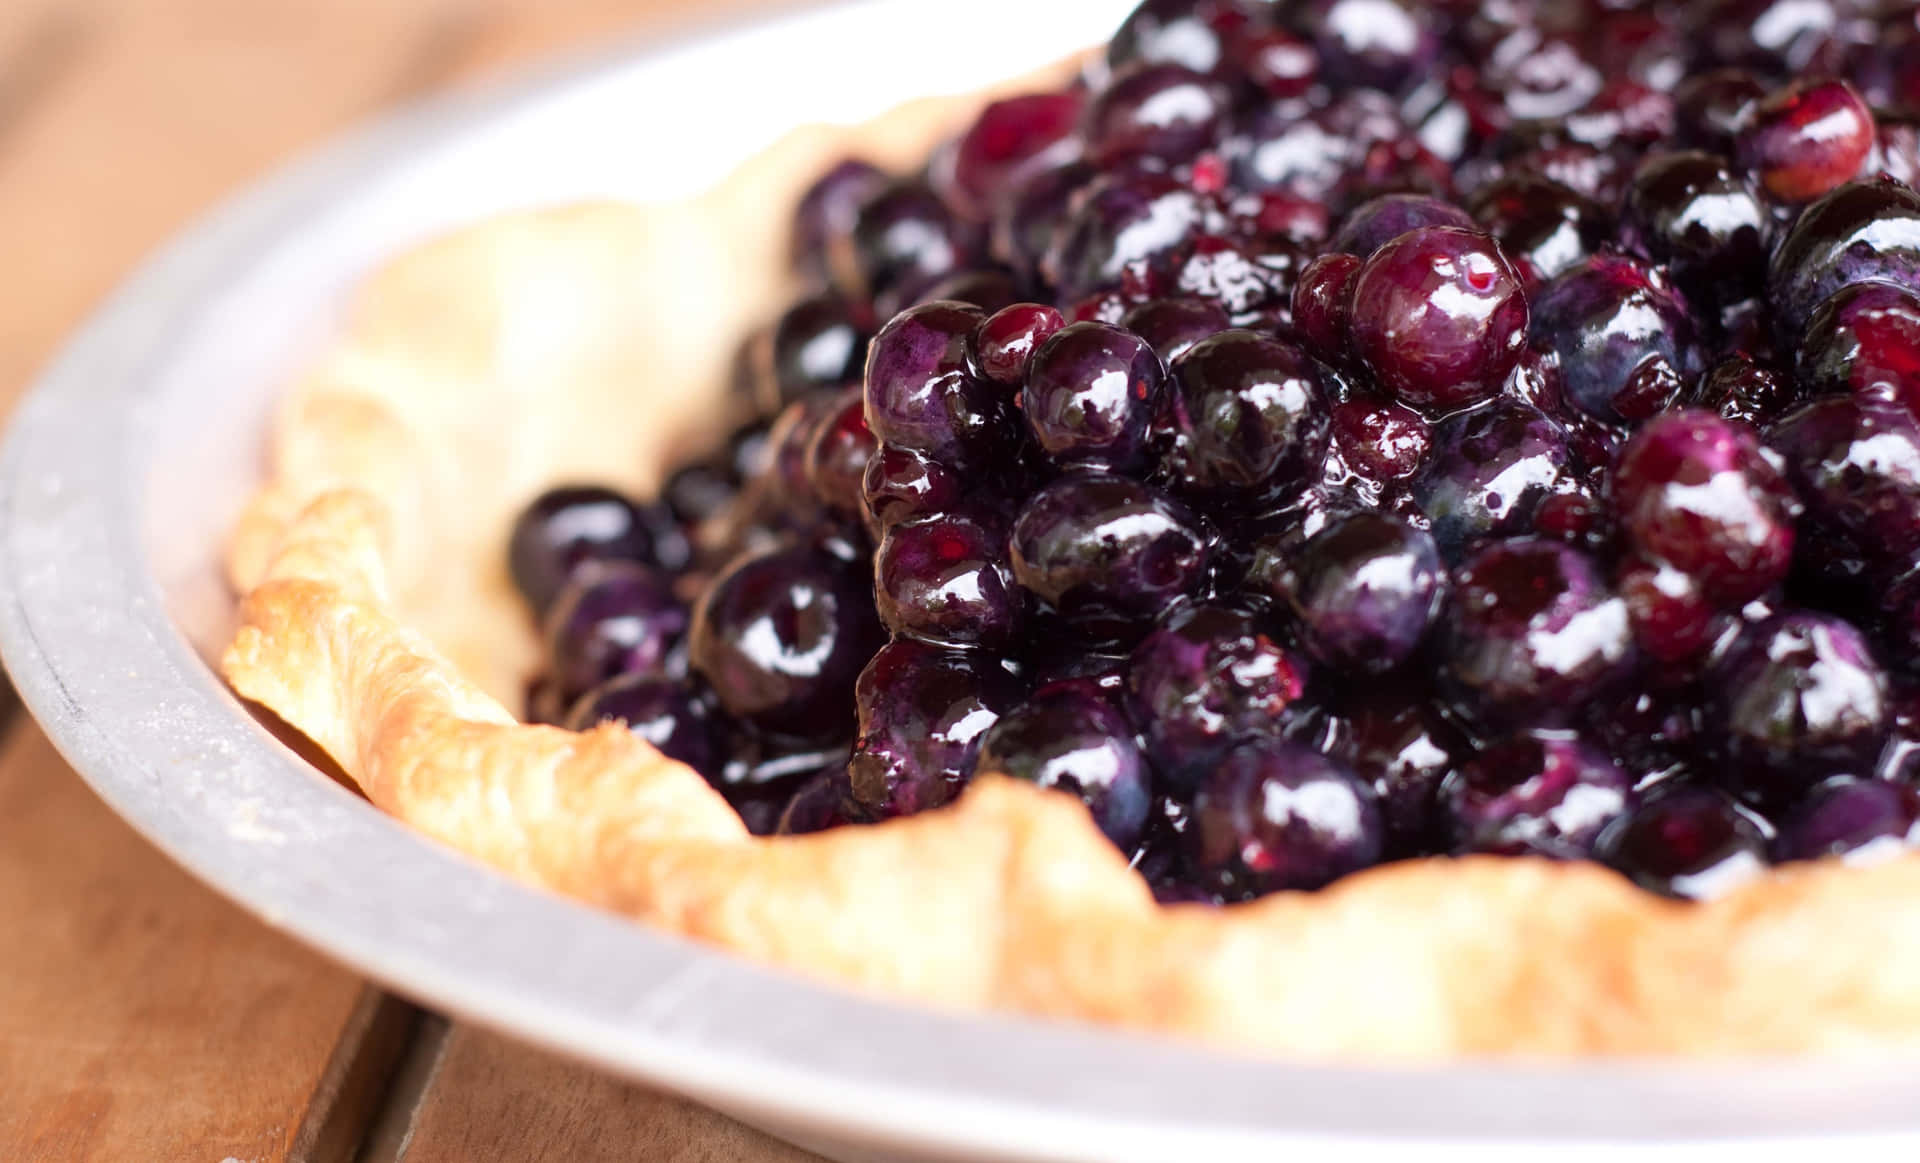 Sweet and Delicious Blueberry Pie Wallpaper